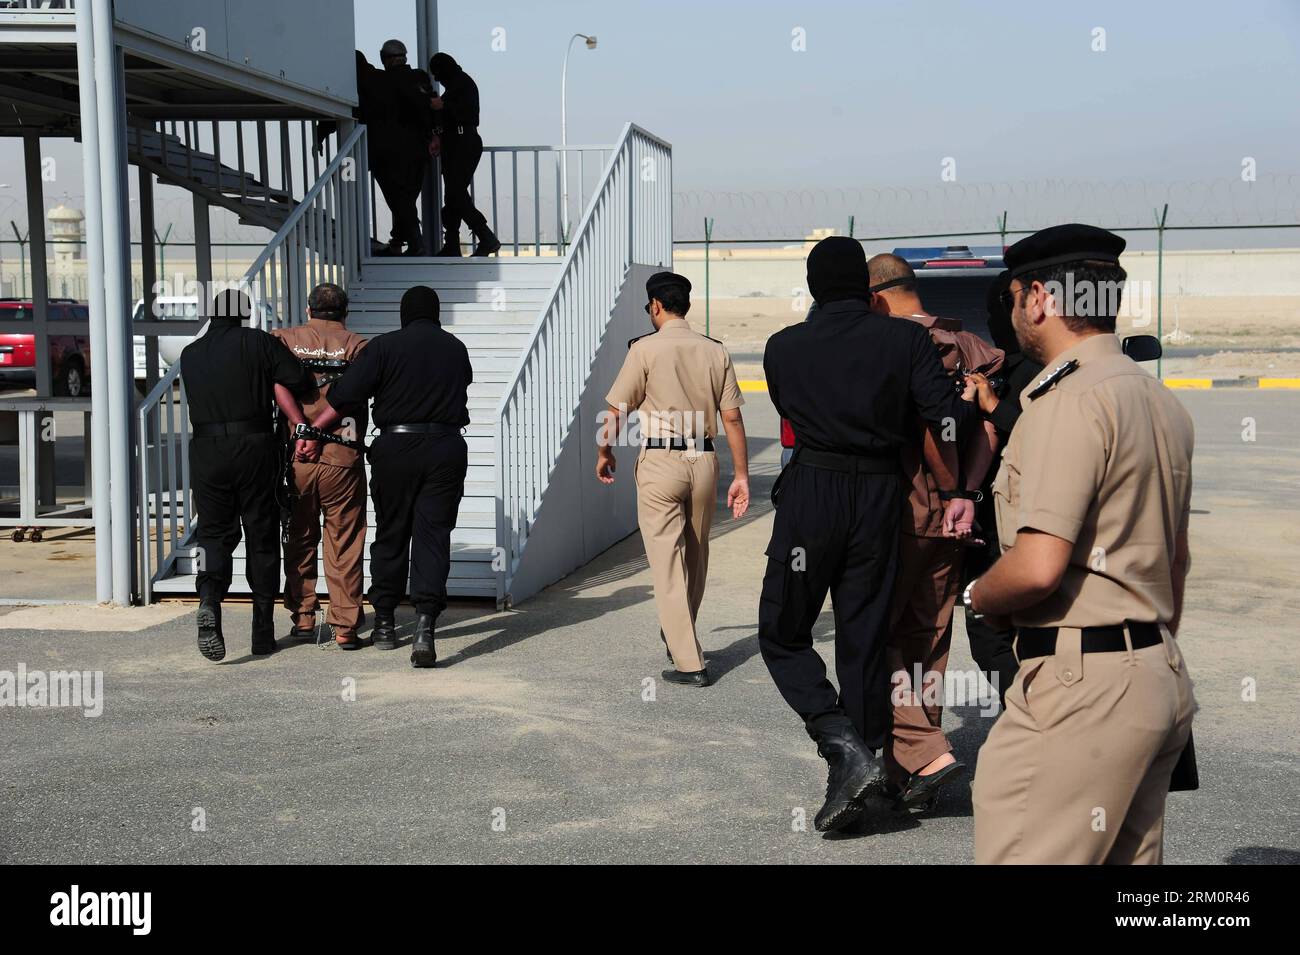 Bildnummer: 59465101  Datum: 01.04.2013  Copyright: imago/Xinhua (130401) -- KUWAIT CITY, APRIL 1, 2013 (Xinhua) -- Three men are walked up on to the scaffolding before being executed by hanging in west of Kuwait City, capital of Kuwait, on April 1, 2013. Three convicted murderers, a Pakistani, a Saudi and a stateless Arab, were hanged on Monday. It s the first executions in Kuwait since May 2007, according to the ministry of justice. (Xinhua/Noufal Ibrahim) (jl) KUWAIT-MURDERER-EXECUTION PUBLICATIONxNOTxINxCHN Gesellschaft Kriminalität Mörder erhängt Exekution Hinrichtung erhängen Tötung x0x Stock Photo